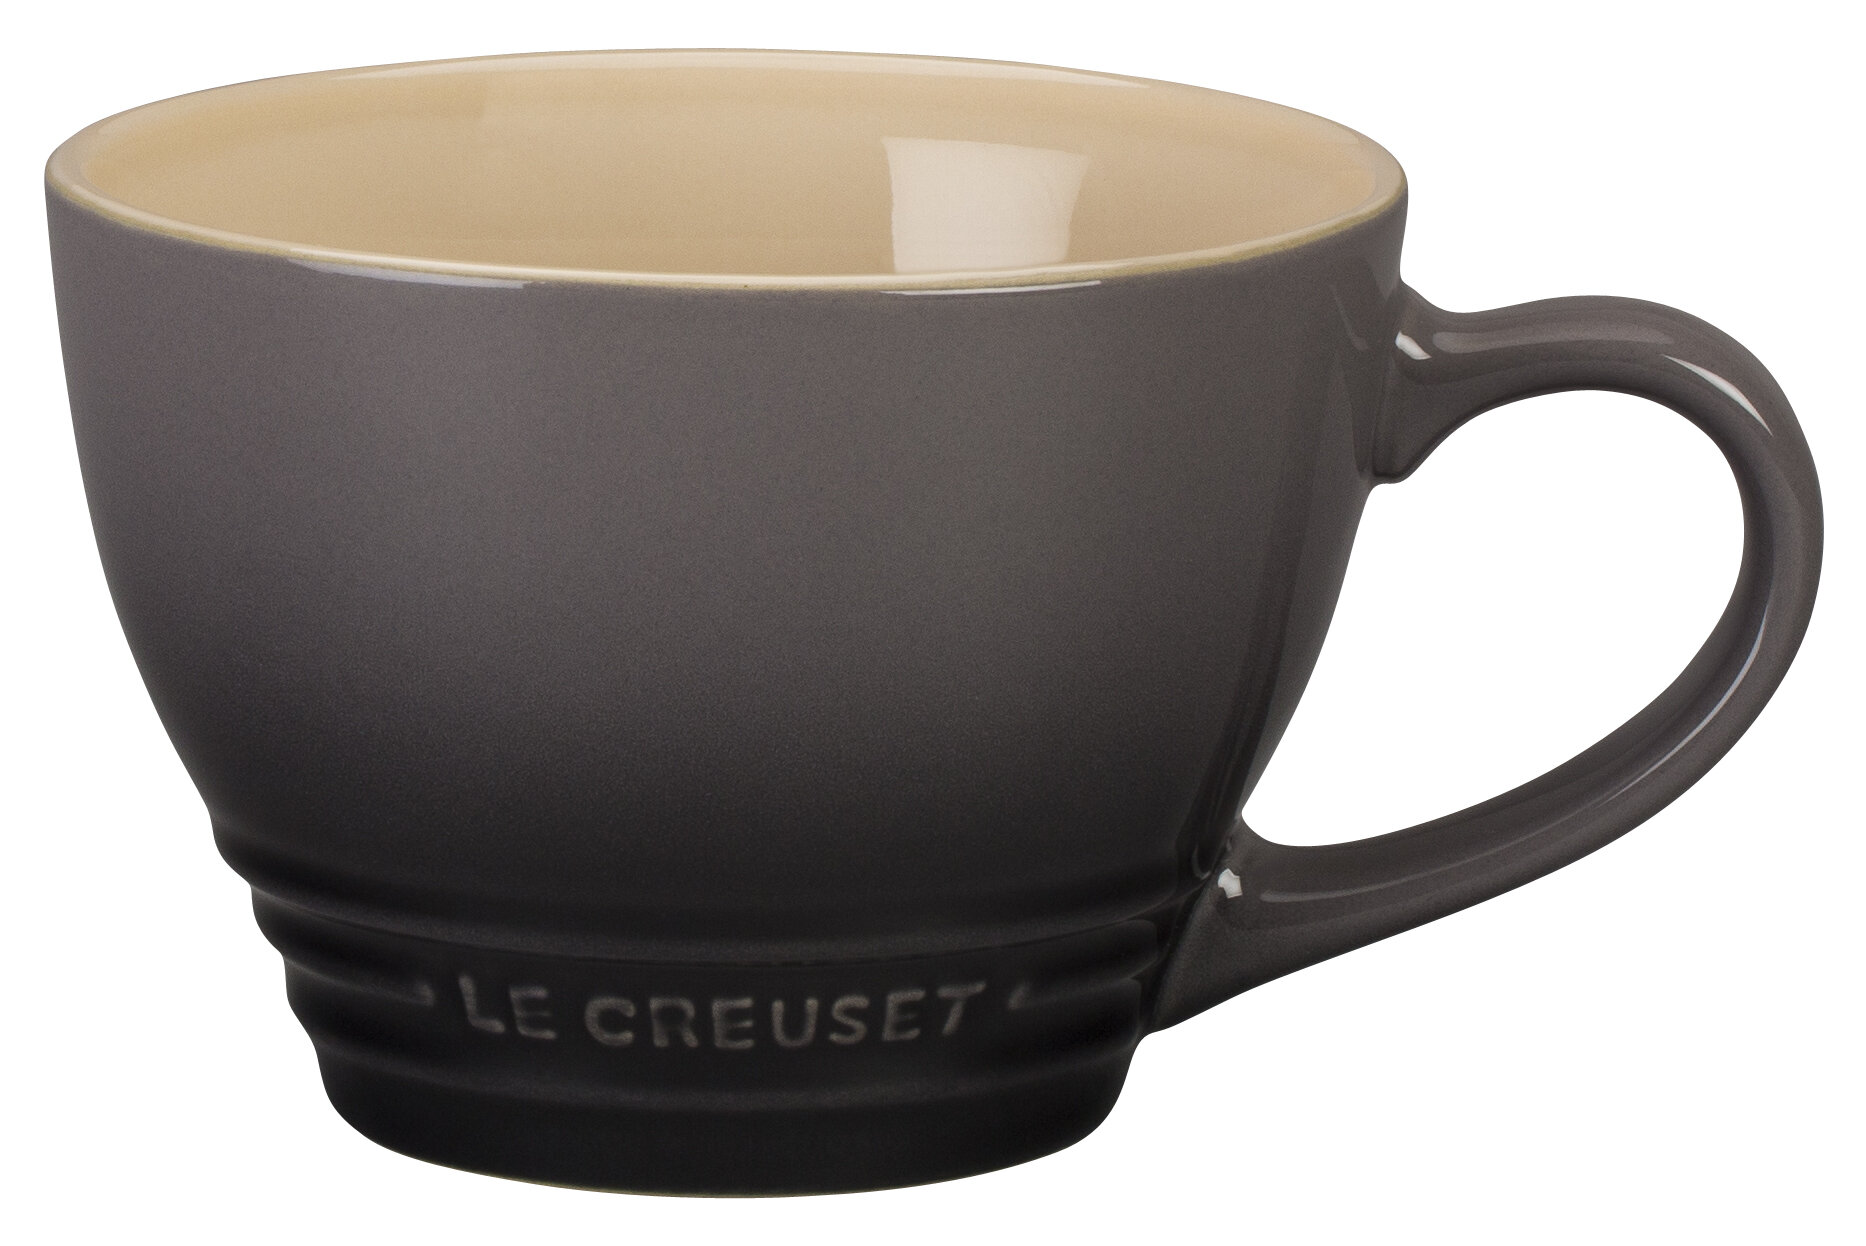 Le Creuset Set of 2 - 7 oz. Cappuccino Cups and Saucers - White